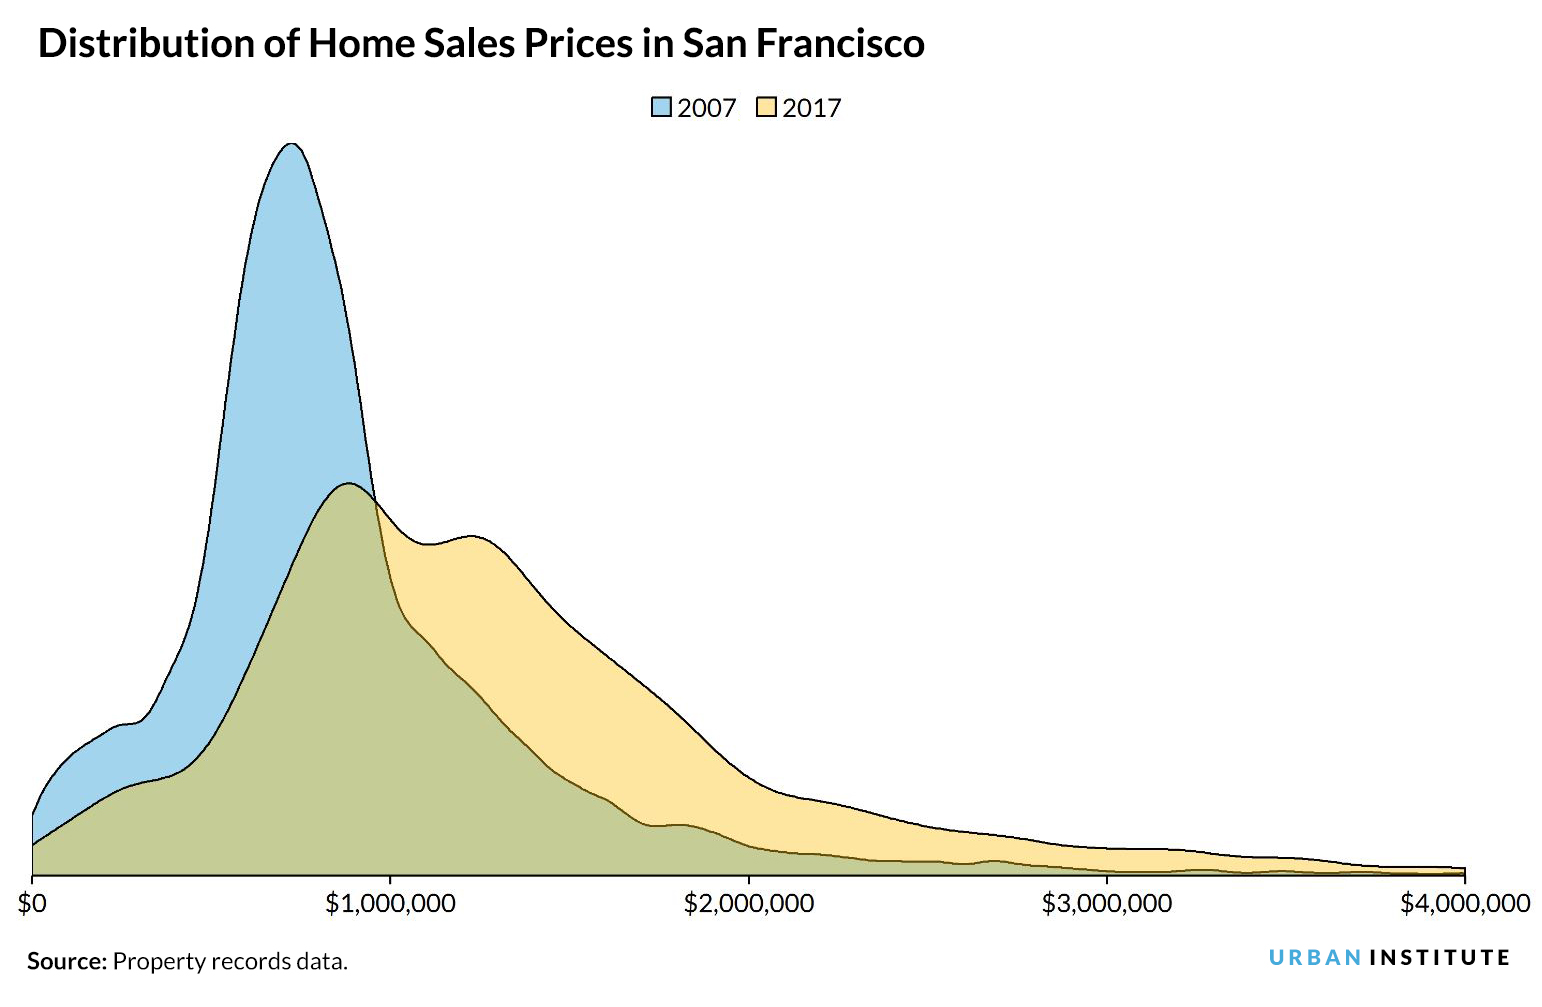 distribution of home sales prices in San Francisco